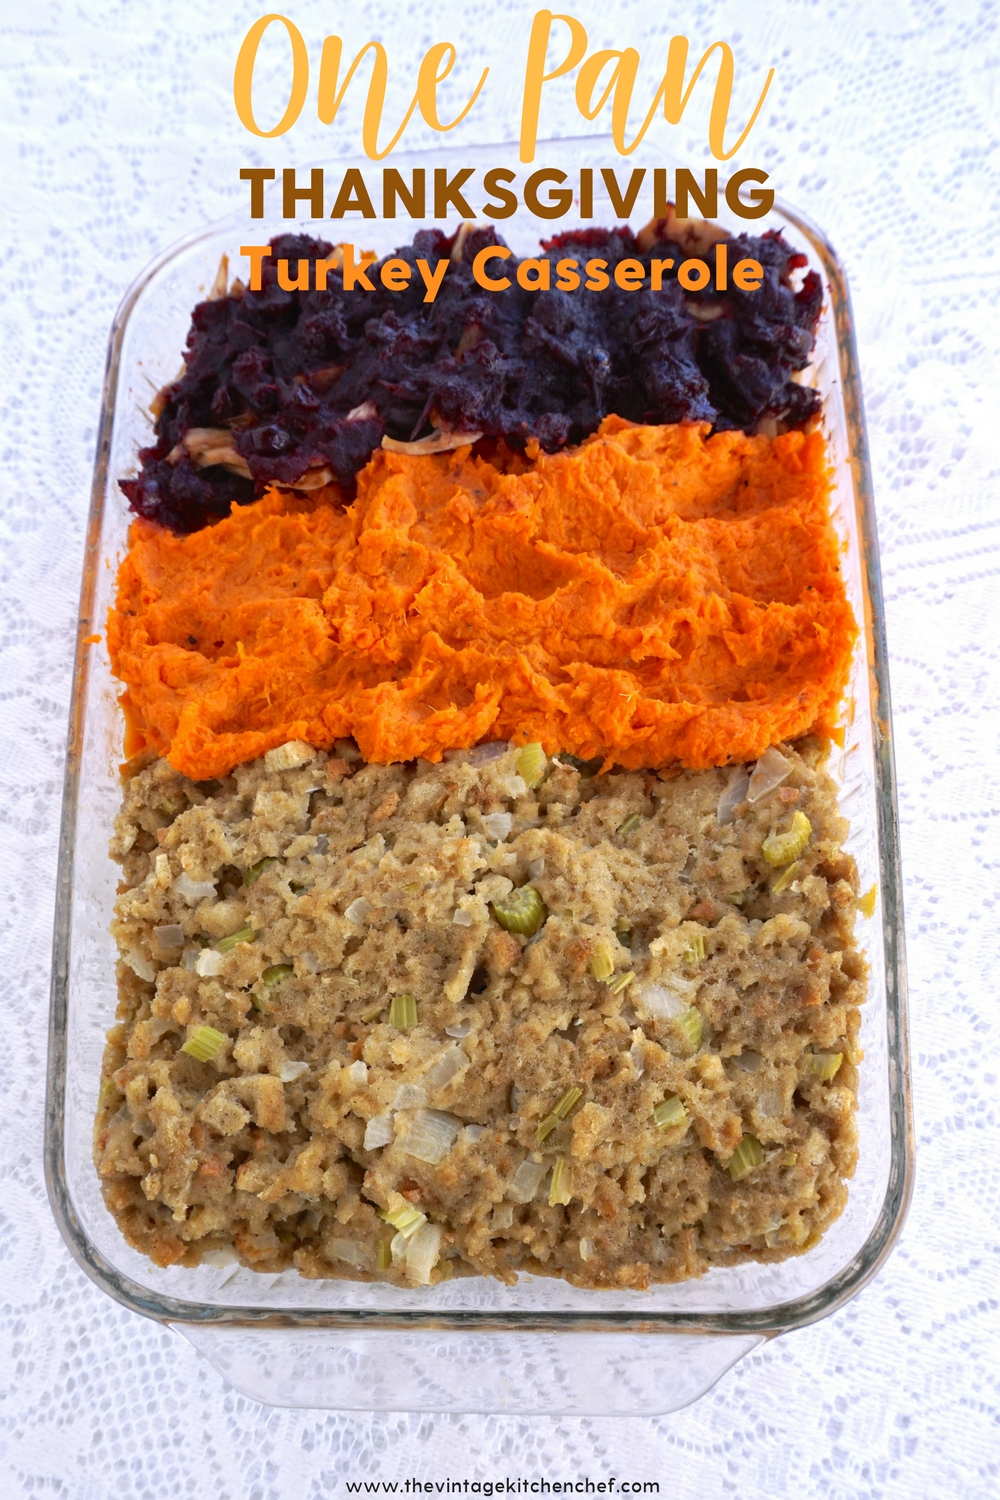 Easy One Pan Thanksgiving Turkey Casserole is great for a family gathering! Guess what? We enjoy this even when it's not November since it's delicious!